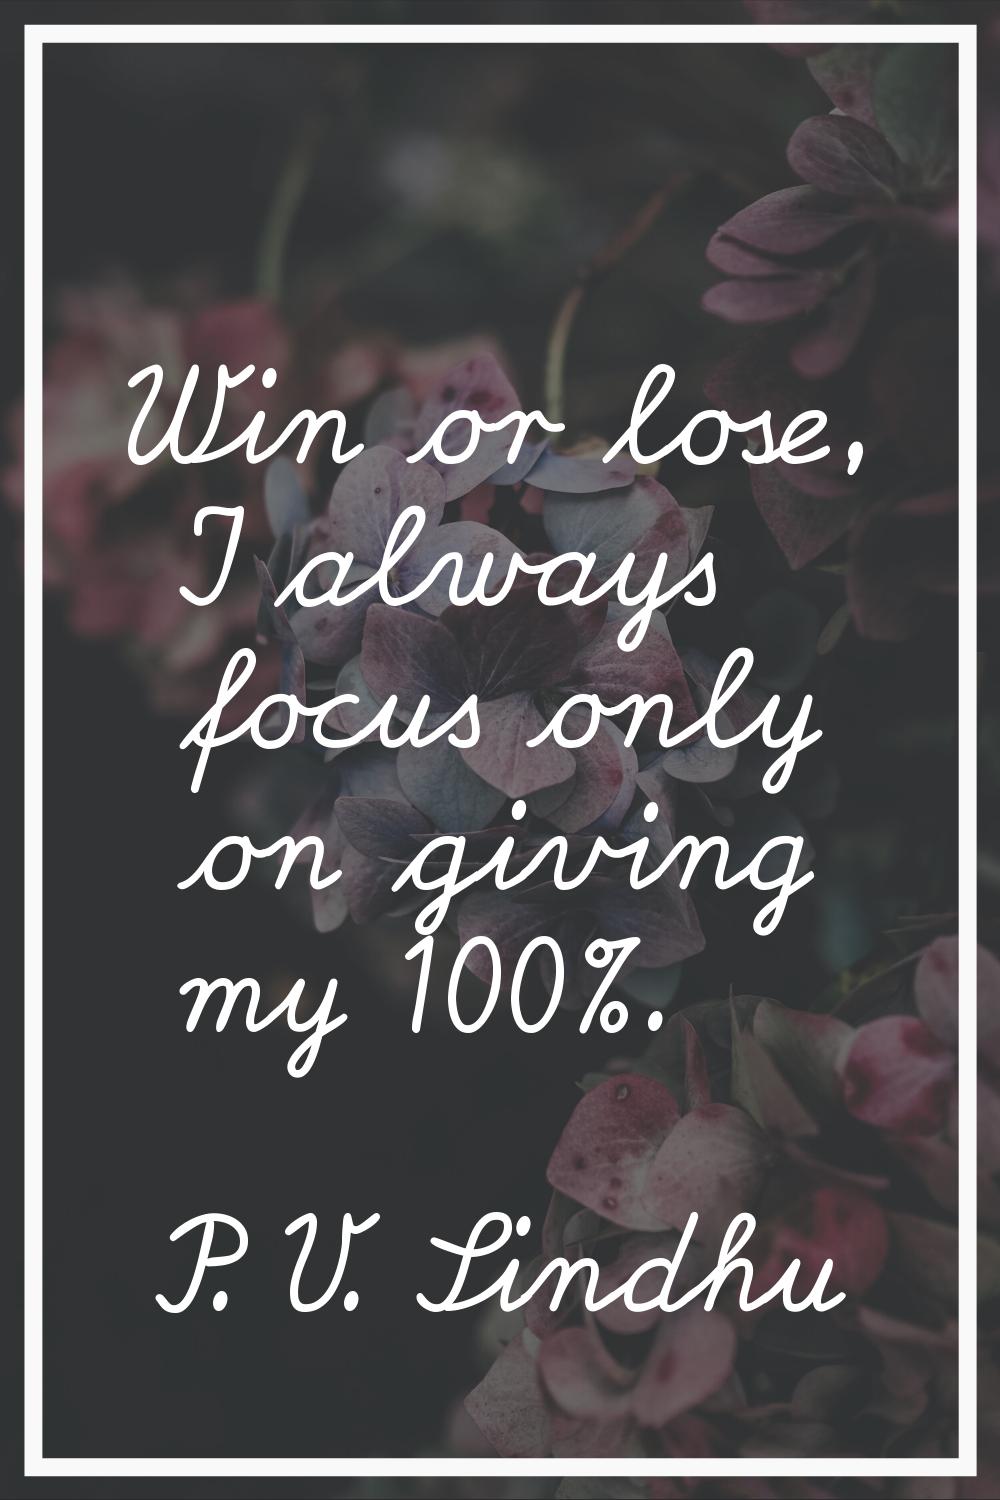 Win or lose, I always focus only on giving my 100%.